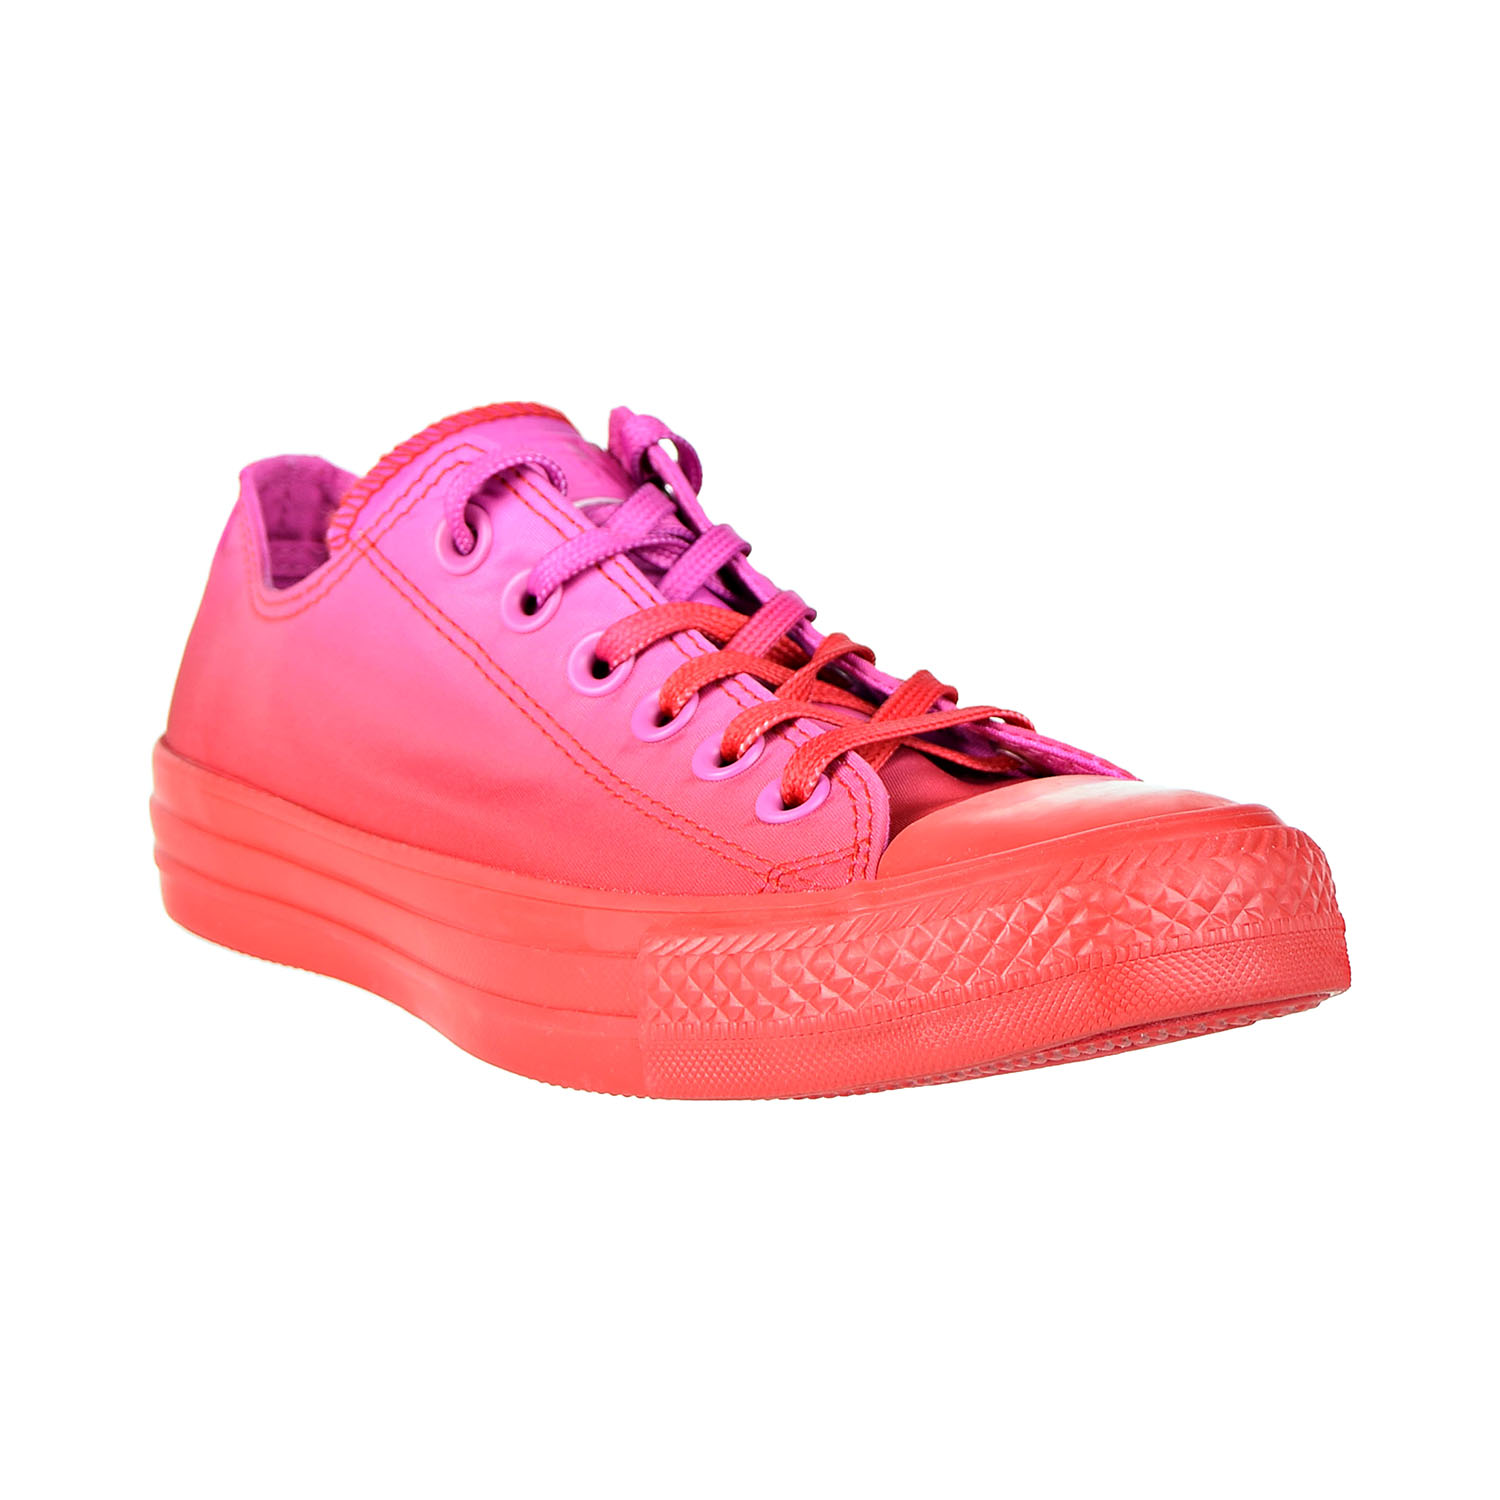 Converse Chuck Taylor All Star Ox Men's Shoes Active Fuchsia-Enamel Red 163290c - image 2 of 6